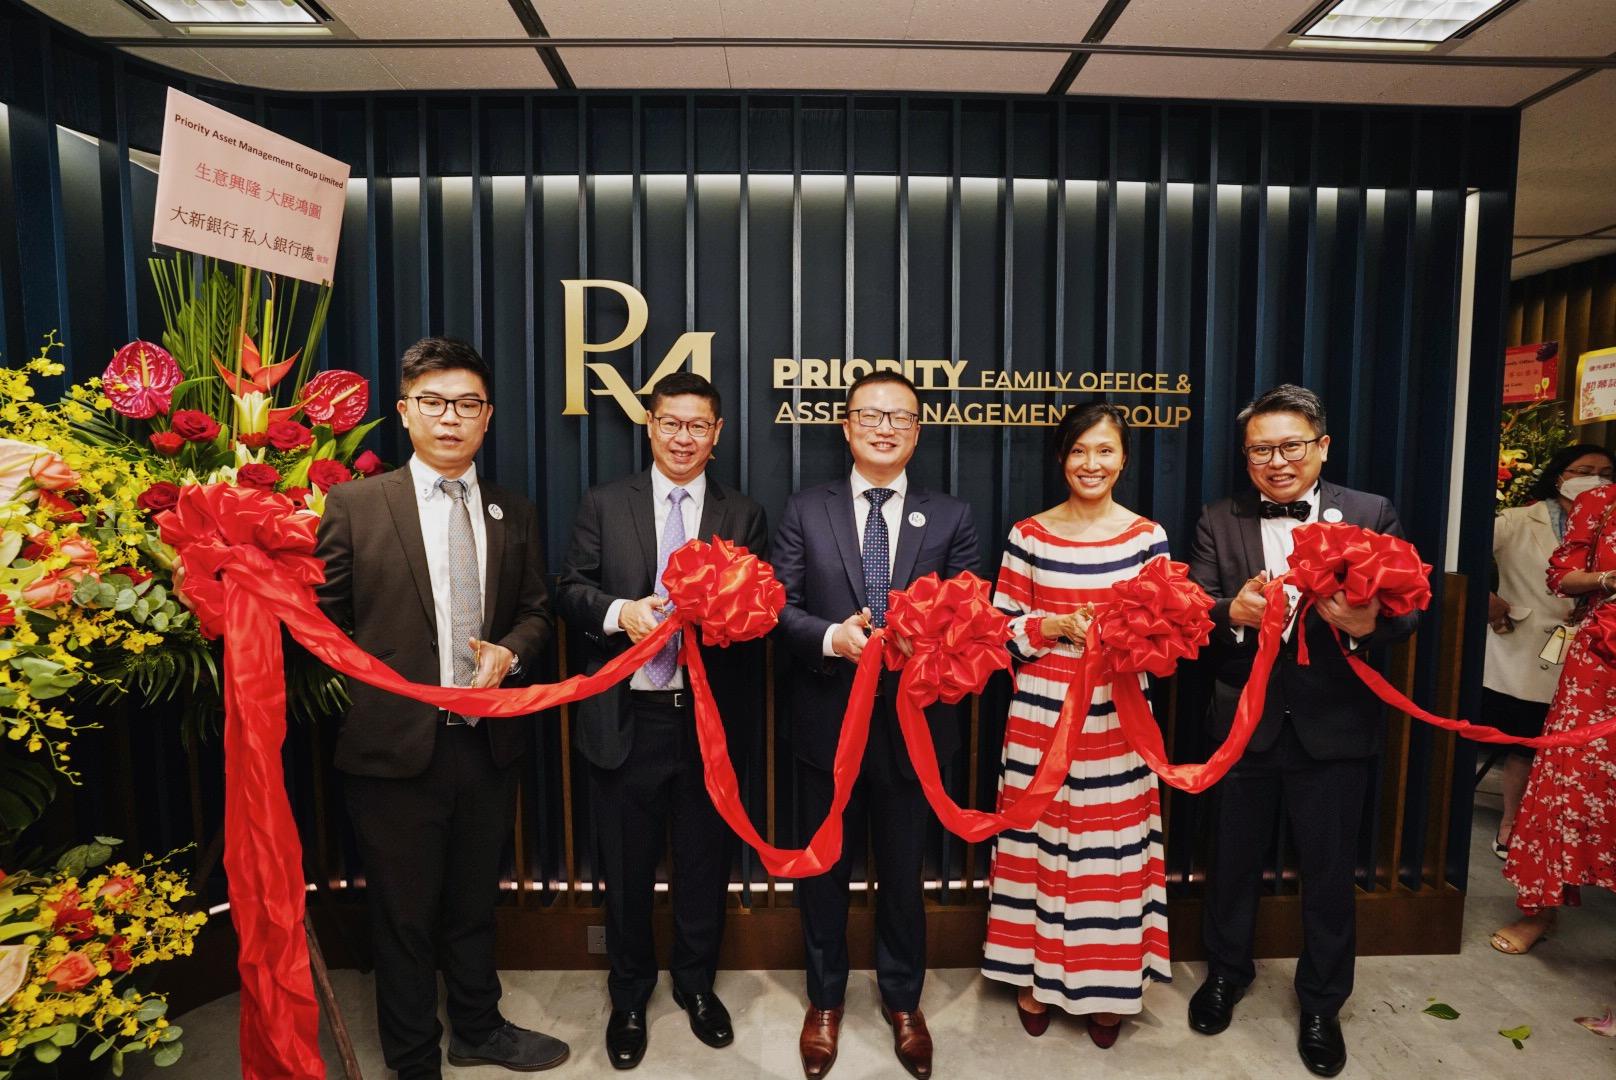 Priority Asset Management Group Limited, a multi-family office formed by several esteemed families from the Mainland and North America, officially opened its global headquarters in Hong Kong today (June 24). Picture shows (from left) the Executive Director of Priority Asset Management Group Limited, Mr William Tam; Managing Director of Priority Asset Management Group Limited Mr Eugene Ho; the Chief Executive Officer of Priority Asset Management Group Limited, Mr Morgan Lin; the Deputy Global Head of Family Office at Invest Hong Kong, Ms Christine Ho; and Managing Director of Priority Asset Management Group Limited Mr June Lee, at the ribbon cutting ceremony. 